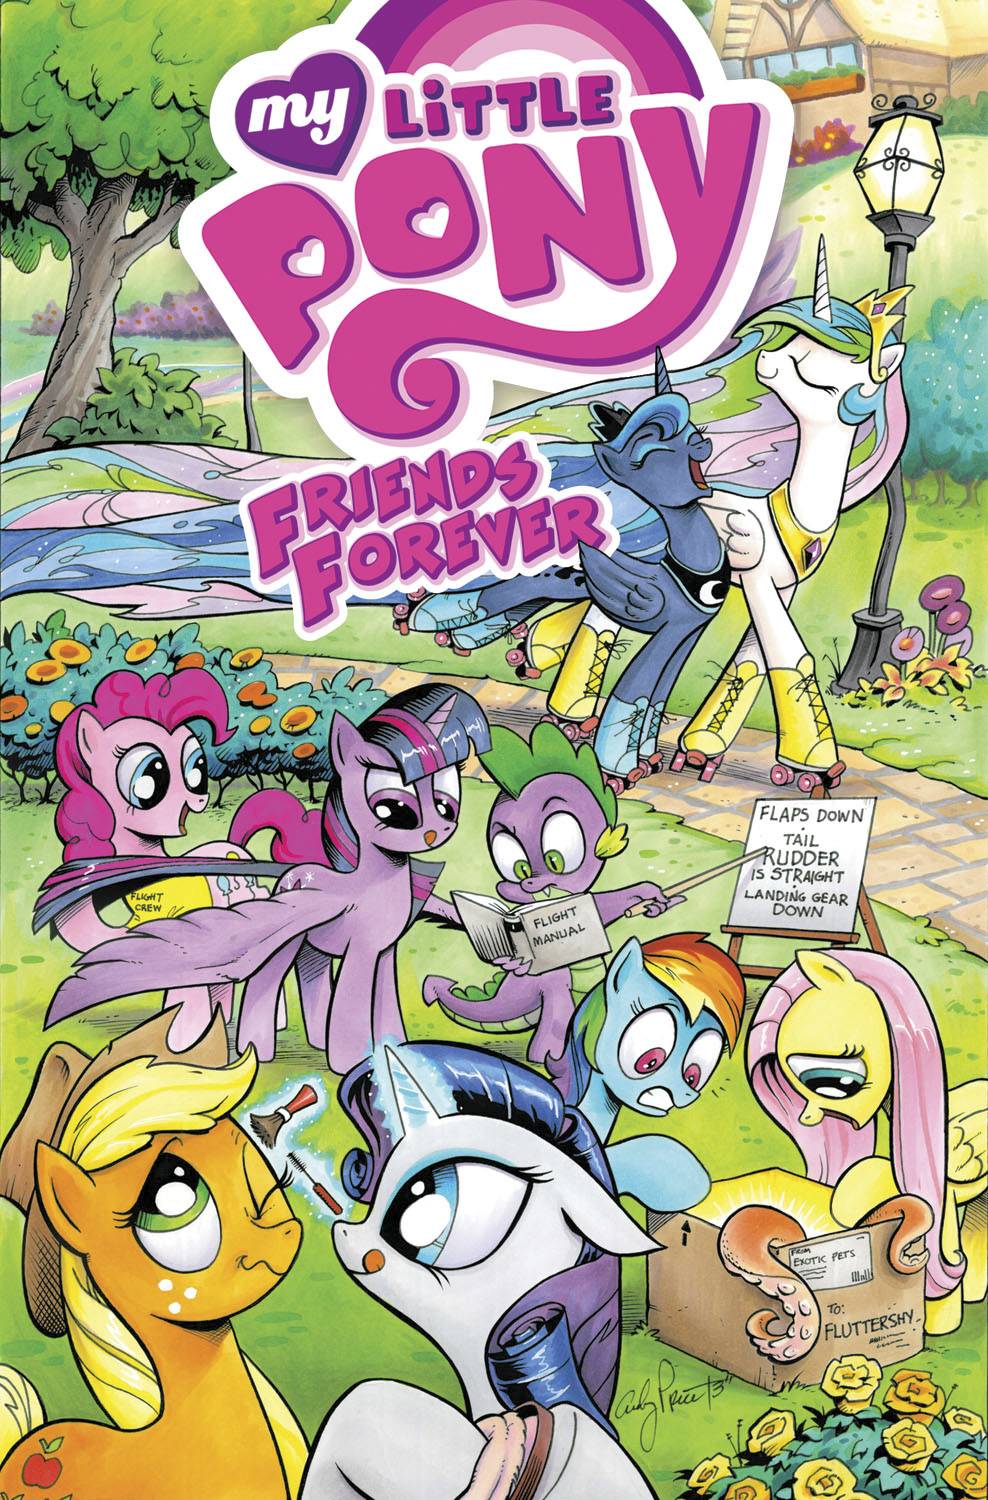 MY LITTLE PONY: FRIENDS FOREVER VOL 01